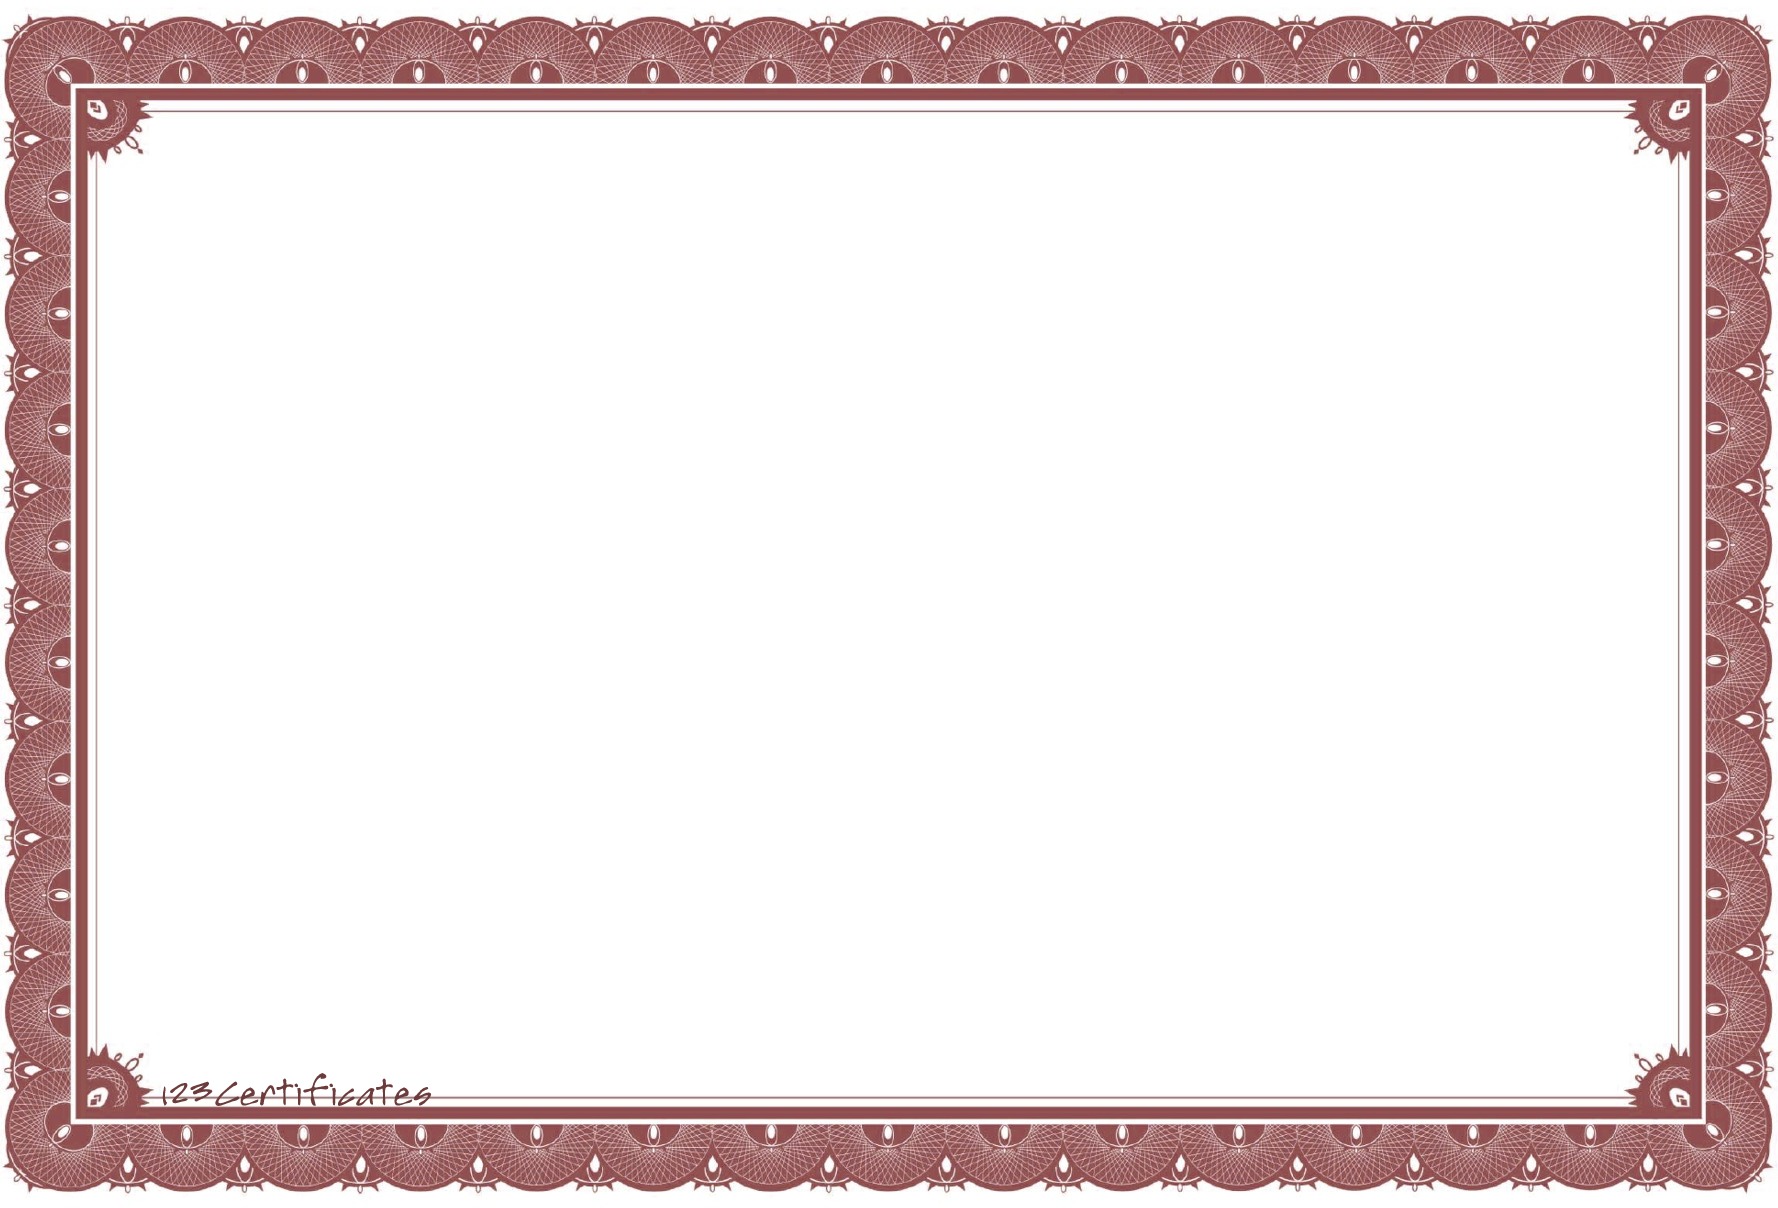  Borders for All Occasions Template Downloads and Design Advice